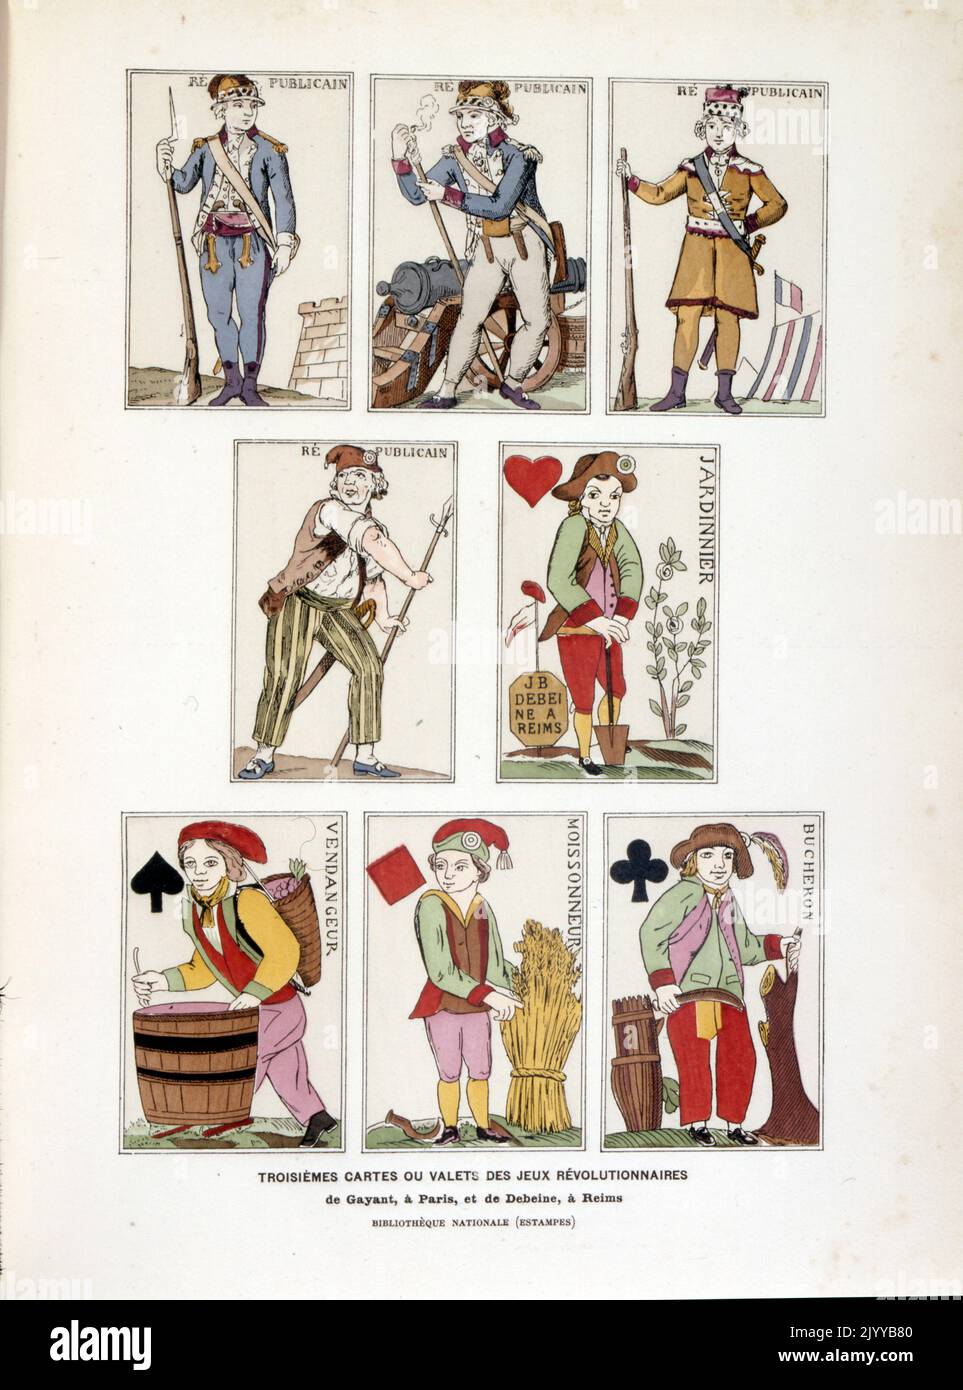 Coloured Illustration of third cards otherwise known as jacks of revolutionary games made by Gayent in Paris. Stock Photo